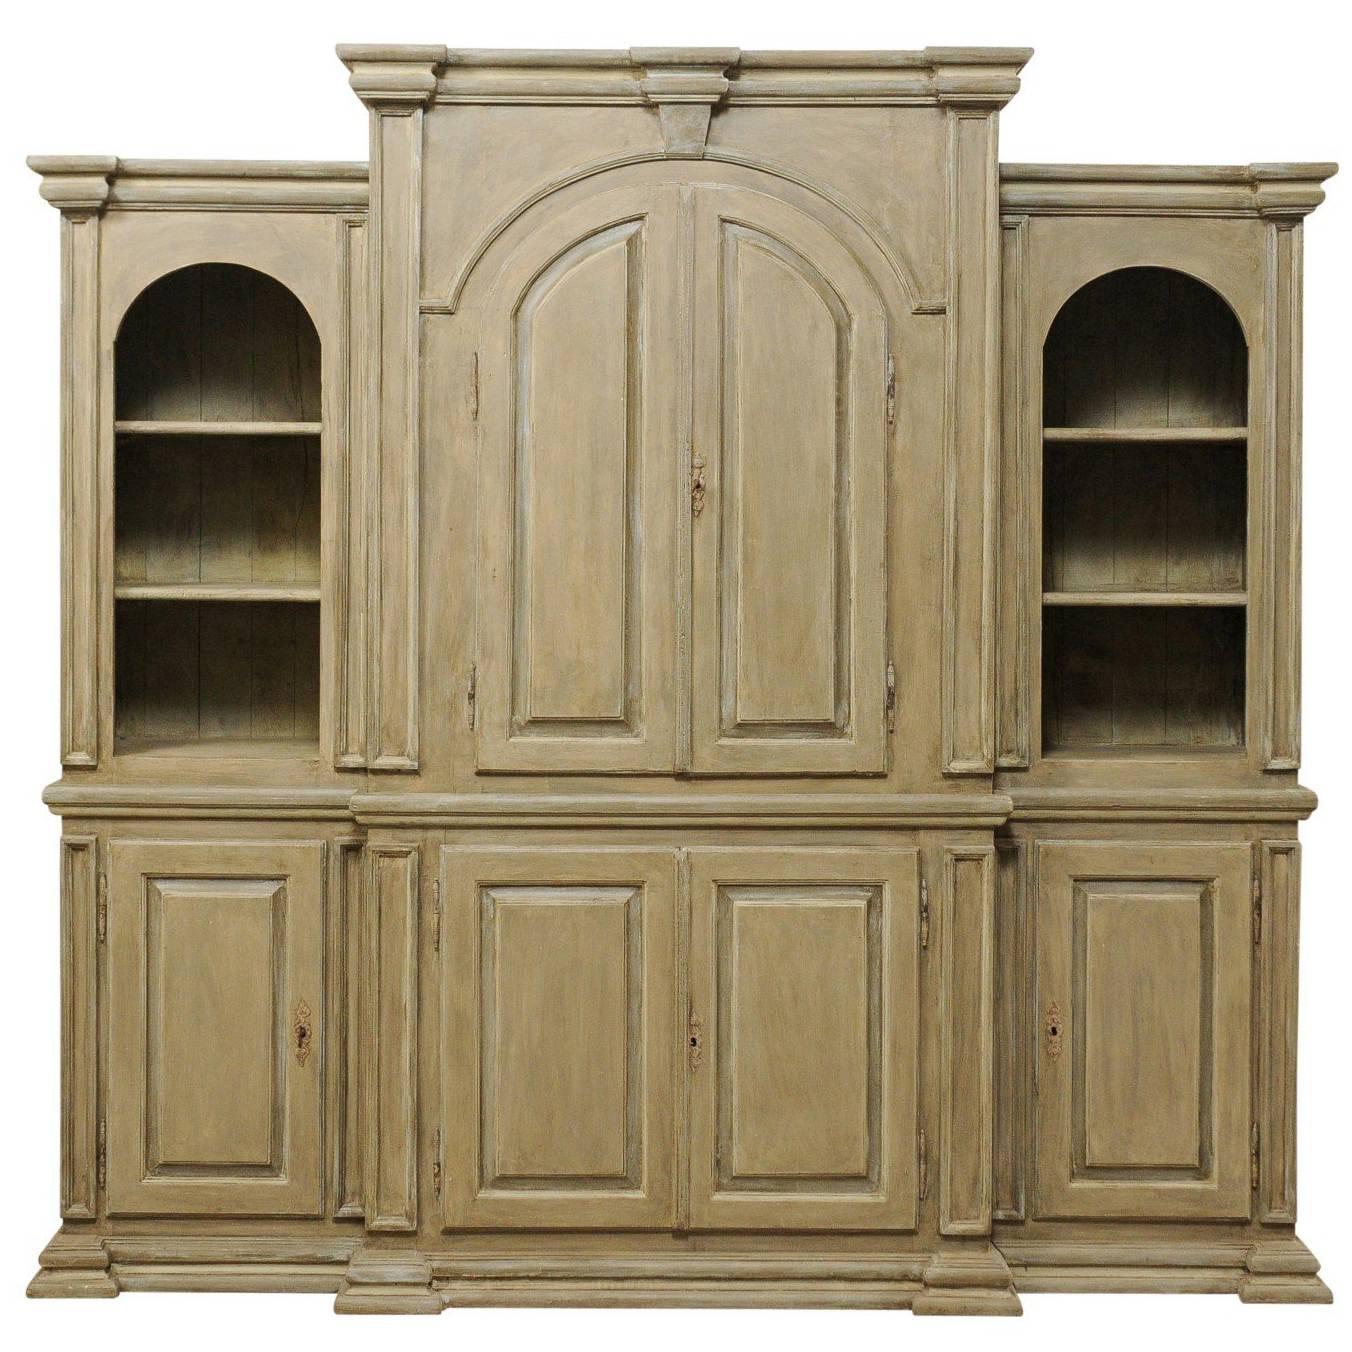 Large Sized Brazilian Painted Wood Cabinet Constructed from Reclaimed Wood